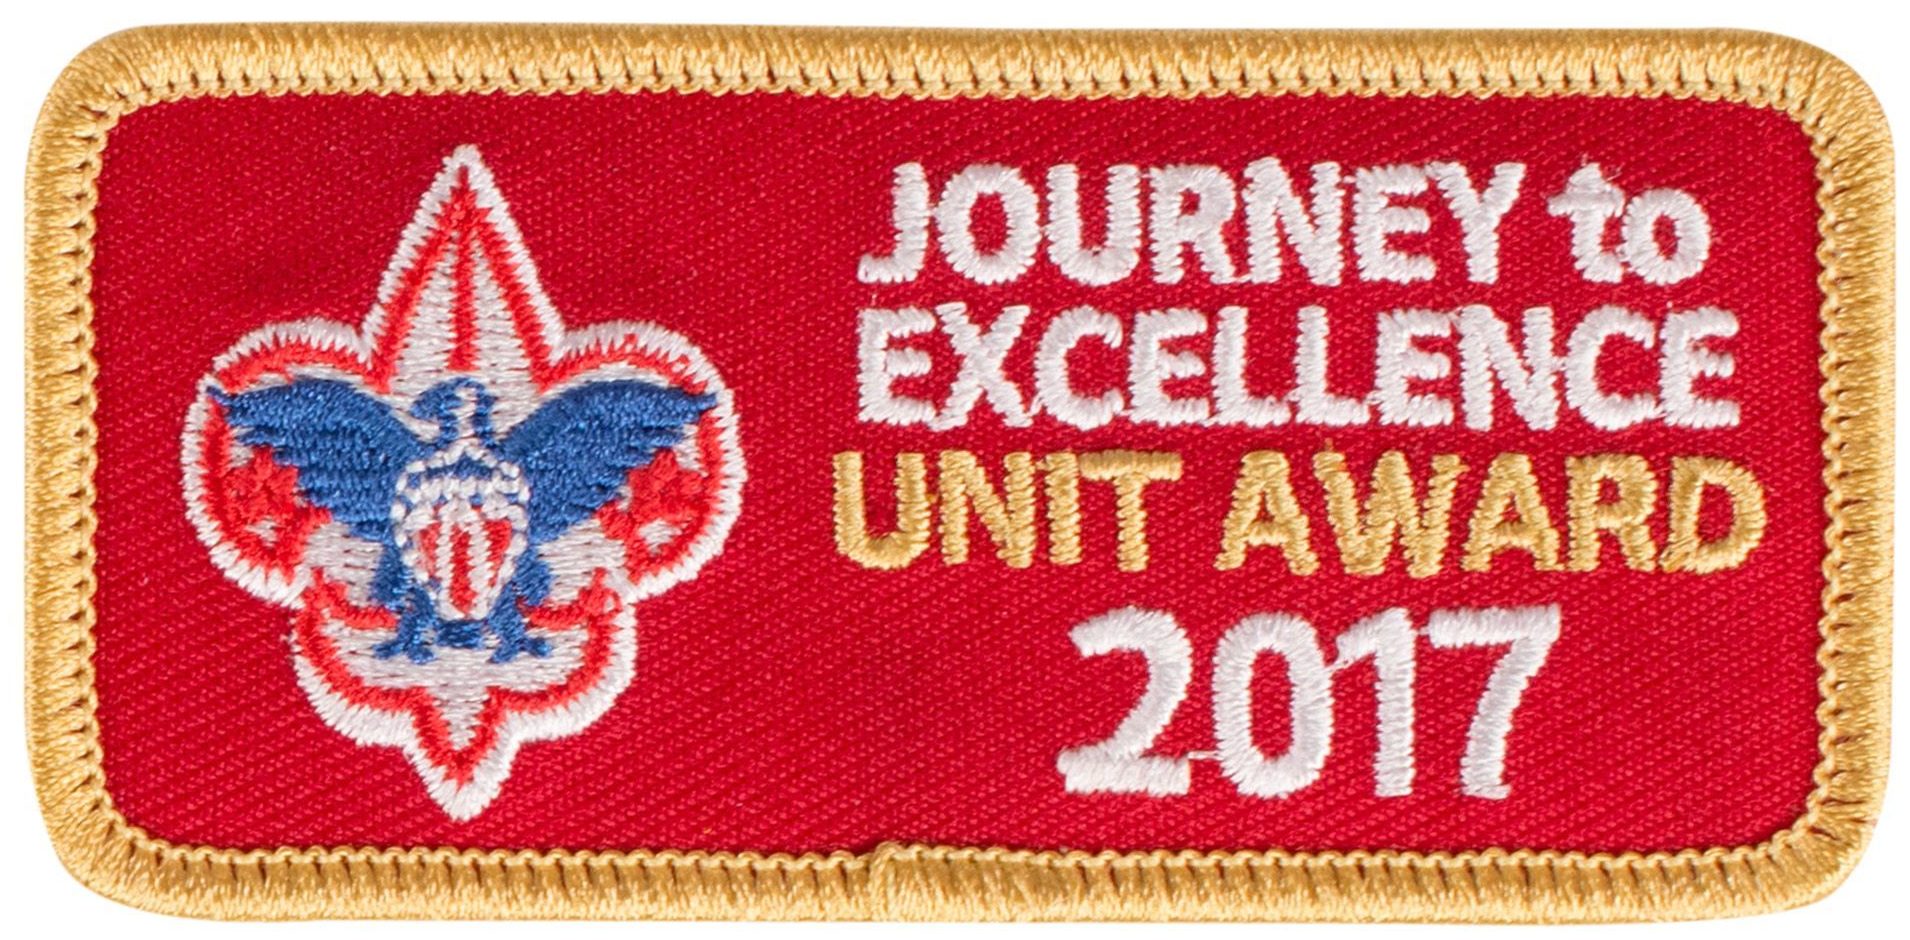 journey to excellence cub scouts